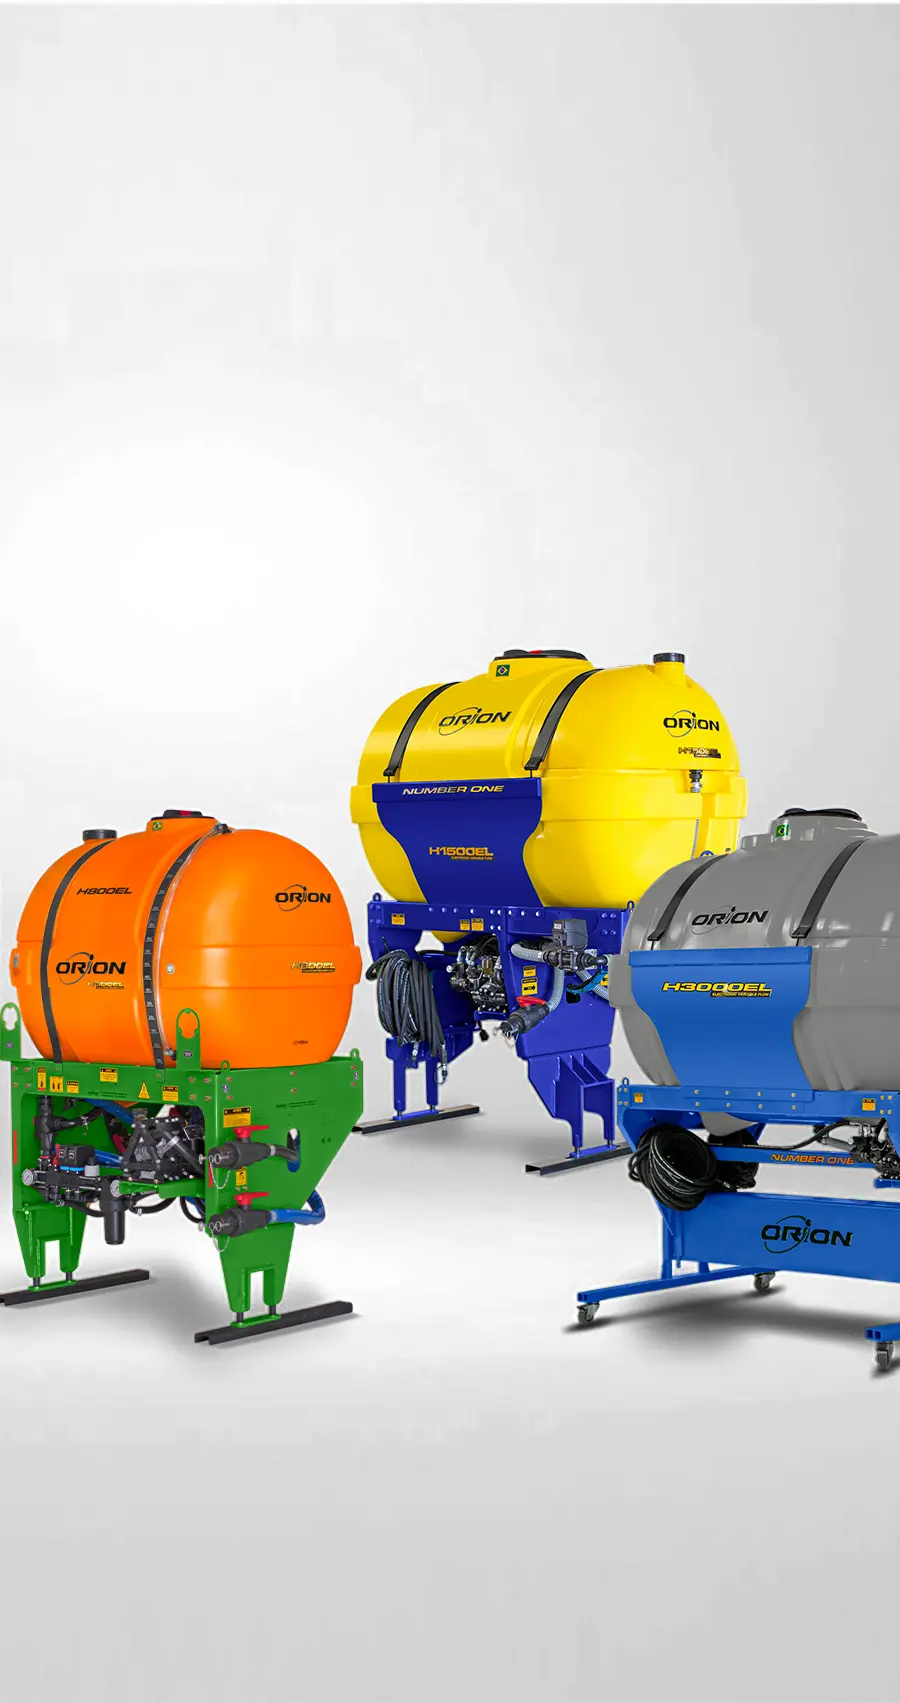 Professional equipment suitable for all brands and models of planters